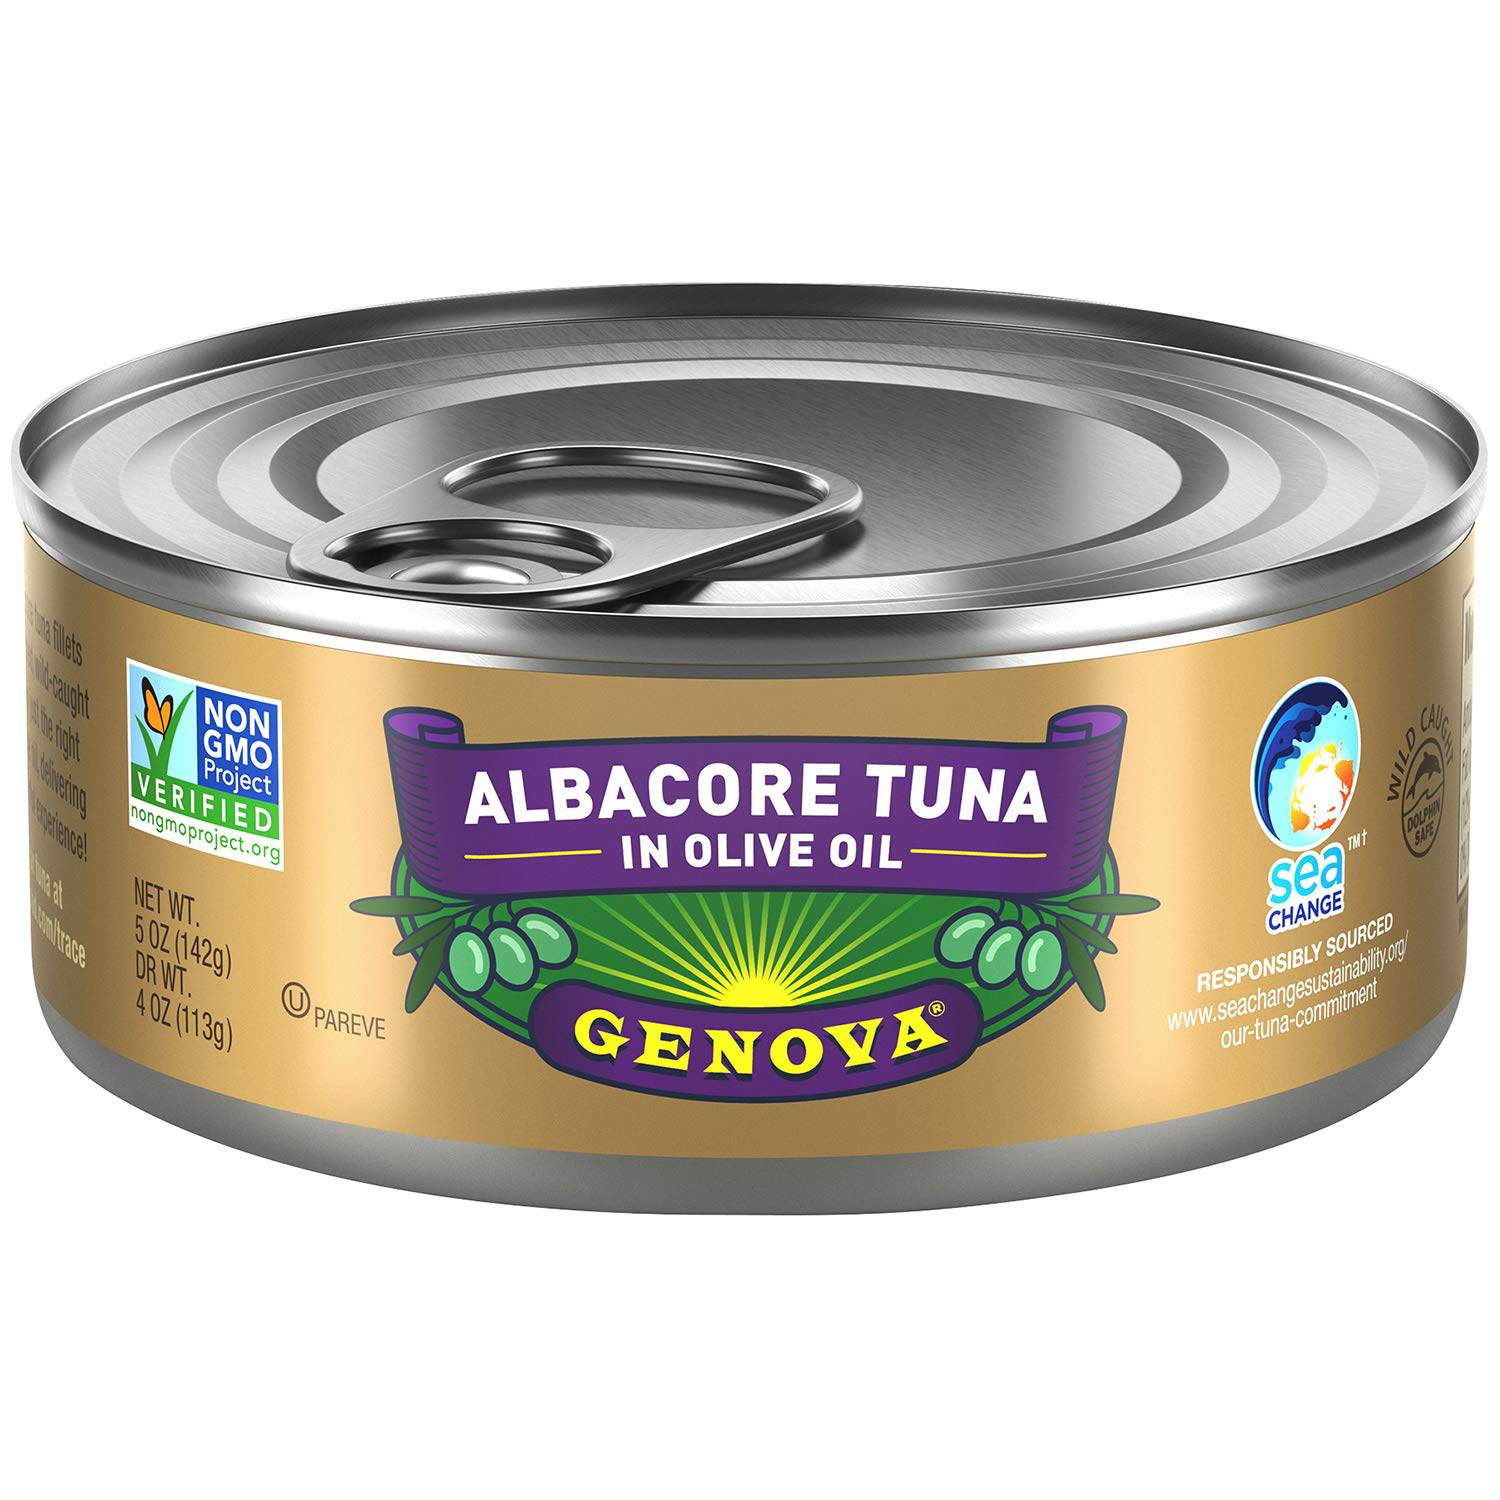 Amazon.com : Genova Premium Albacore Tuna in Olive Oil with Sea Salt, Wild Caught, Solid White, 5 oz. Can (Pack of 12) : Tuna Seafood : Everything Else $17.28